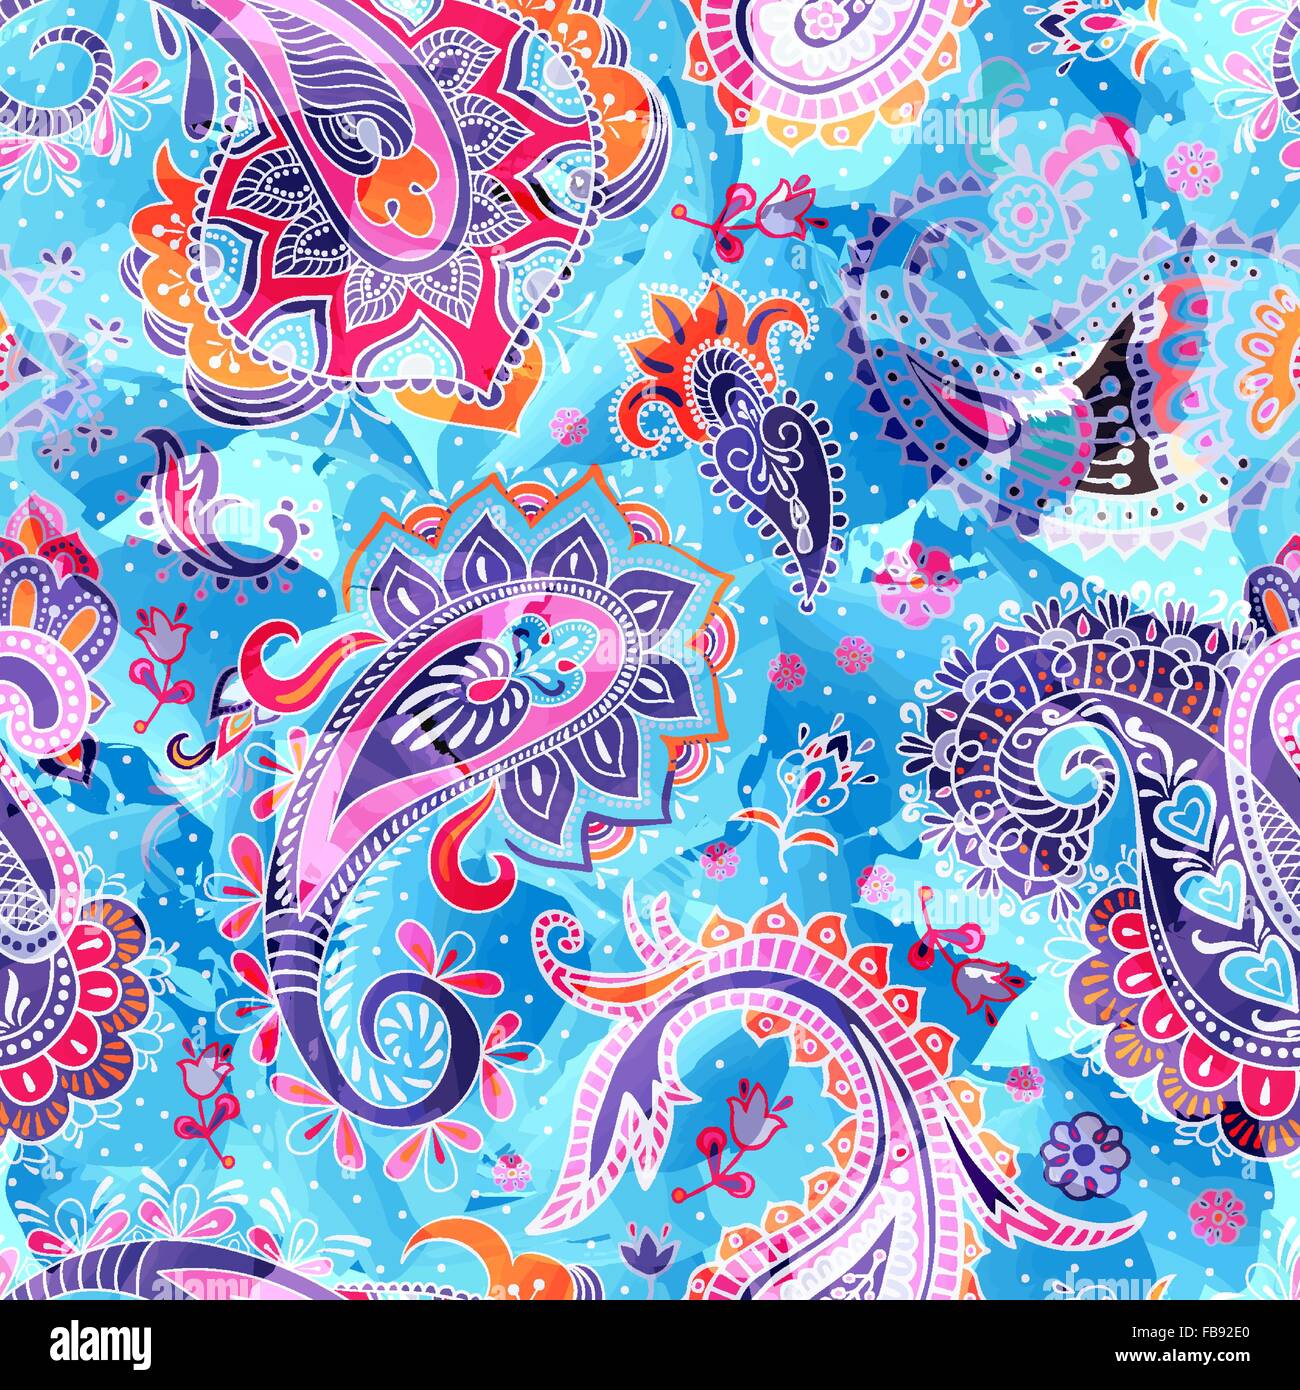 Colorful Paisley pattern Stock Vector